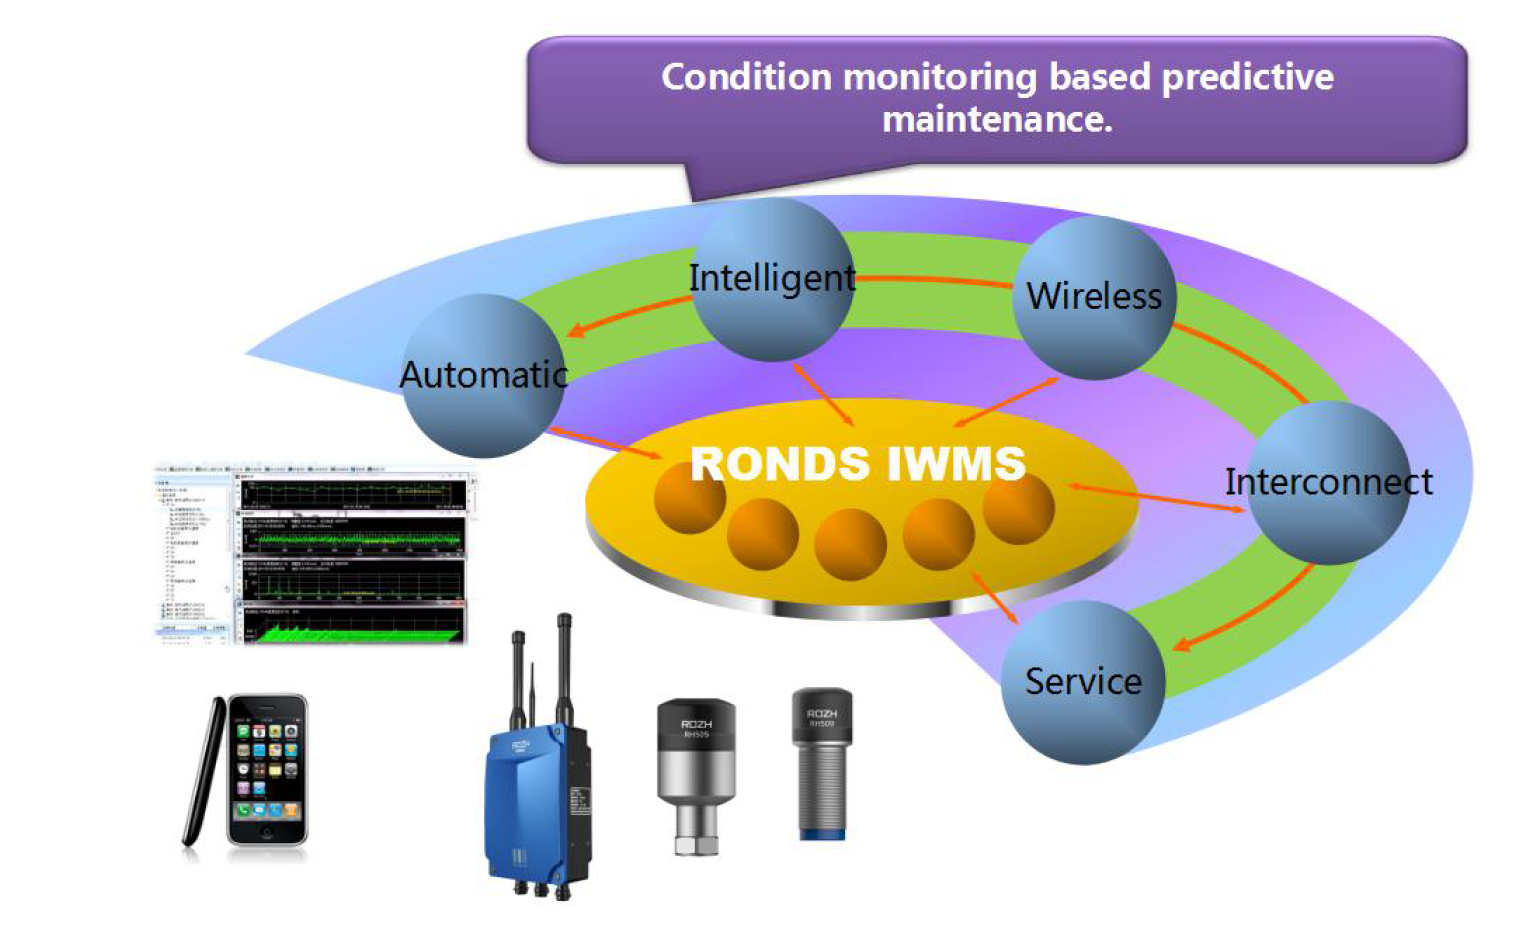 RONDS Intelligent Wireless Monitoring System Graphic.png - 870.47 kB